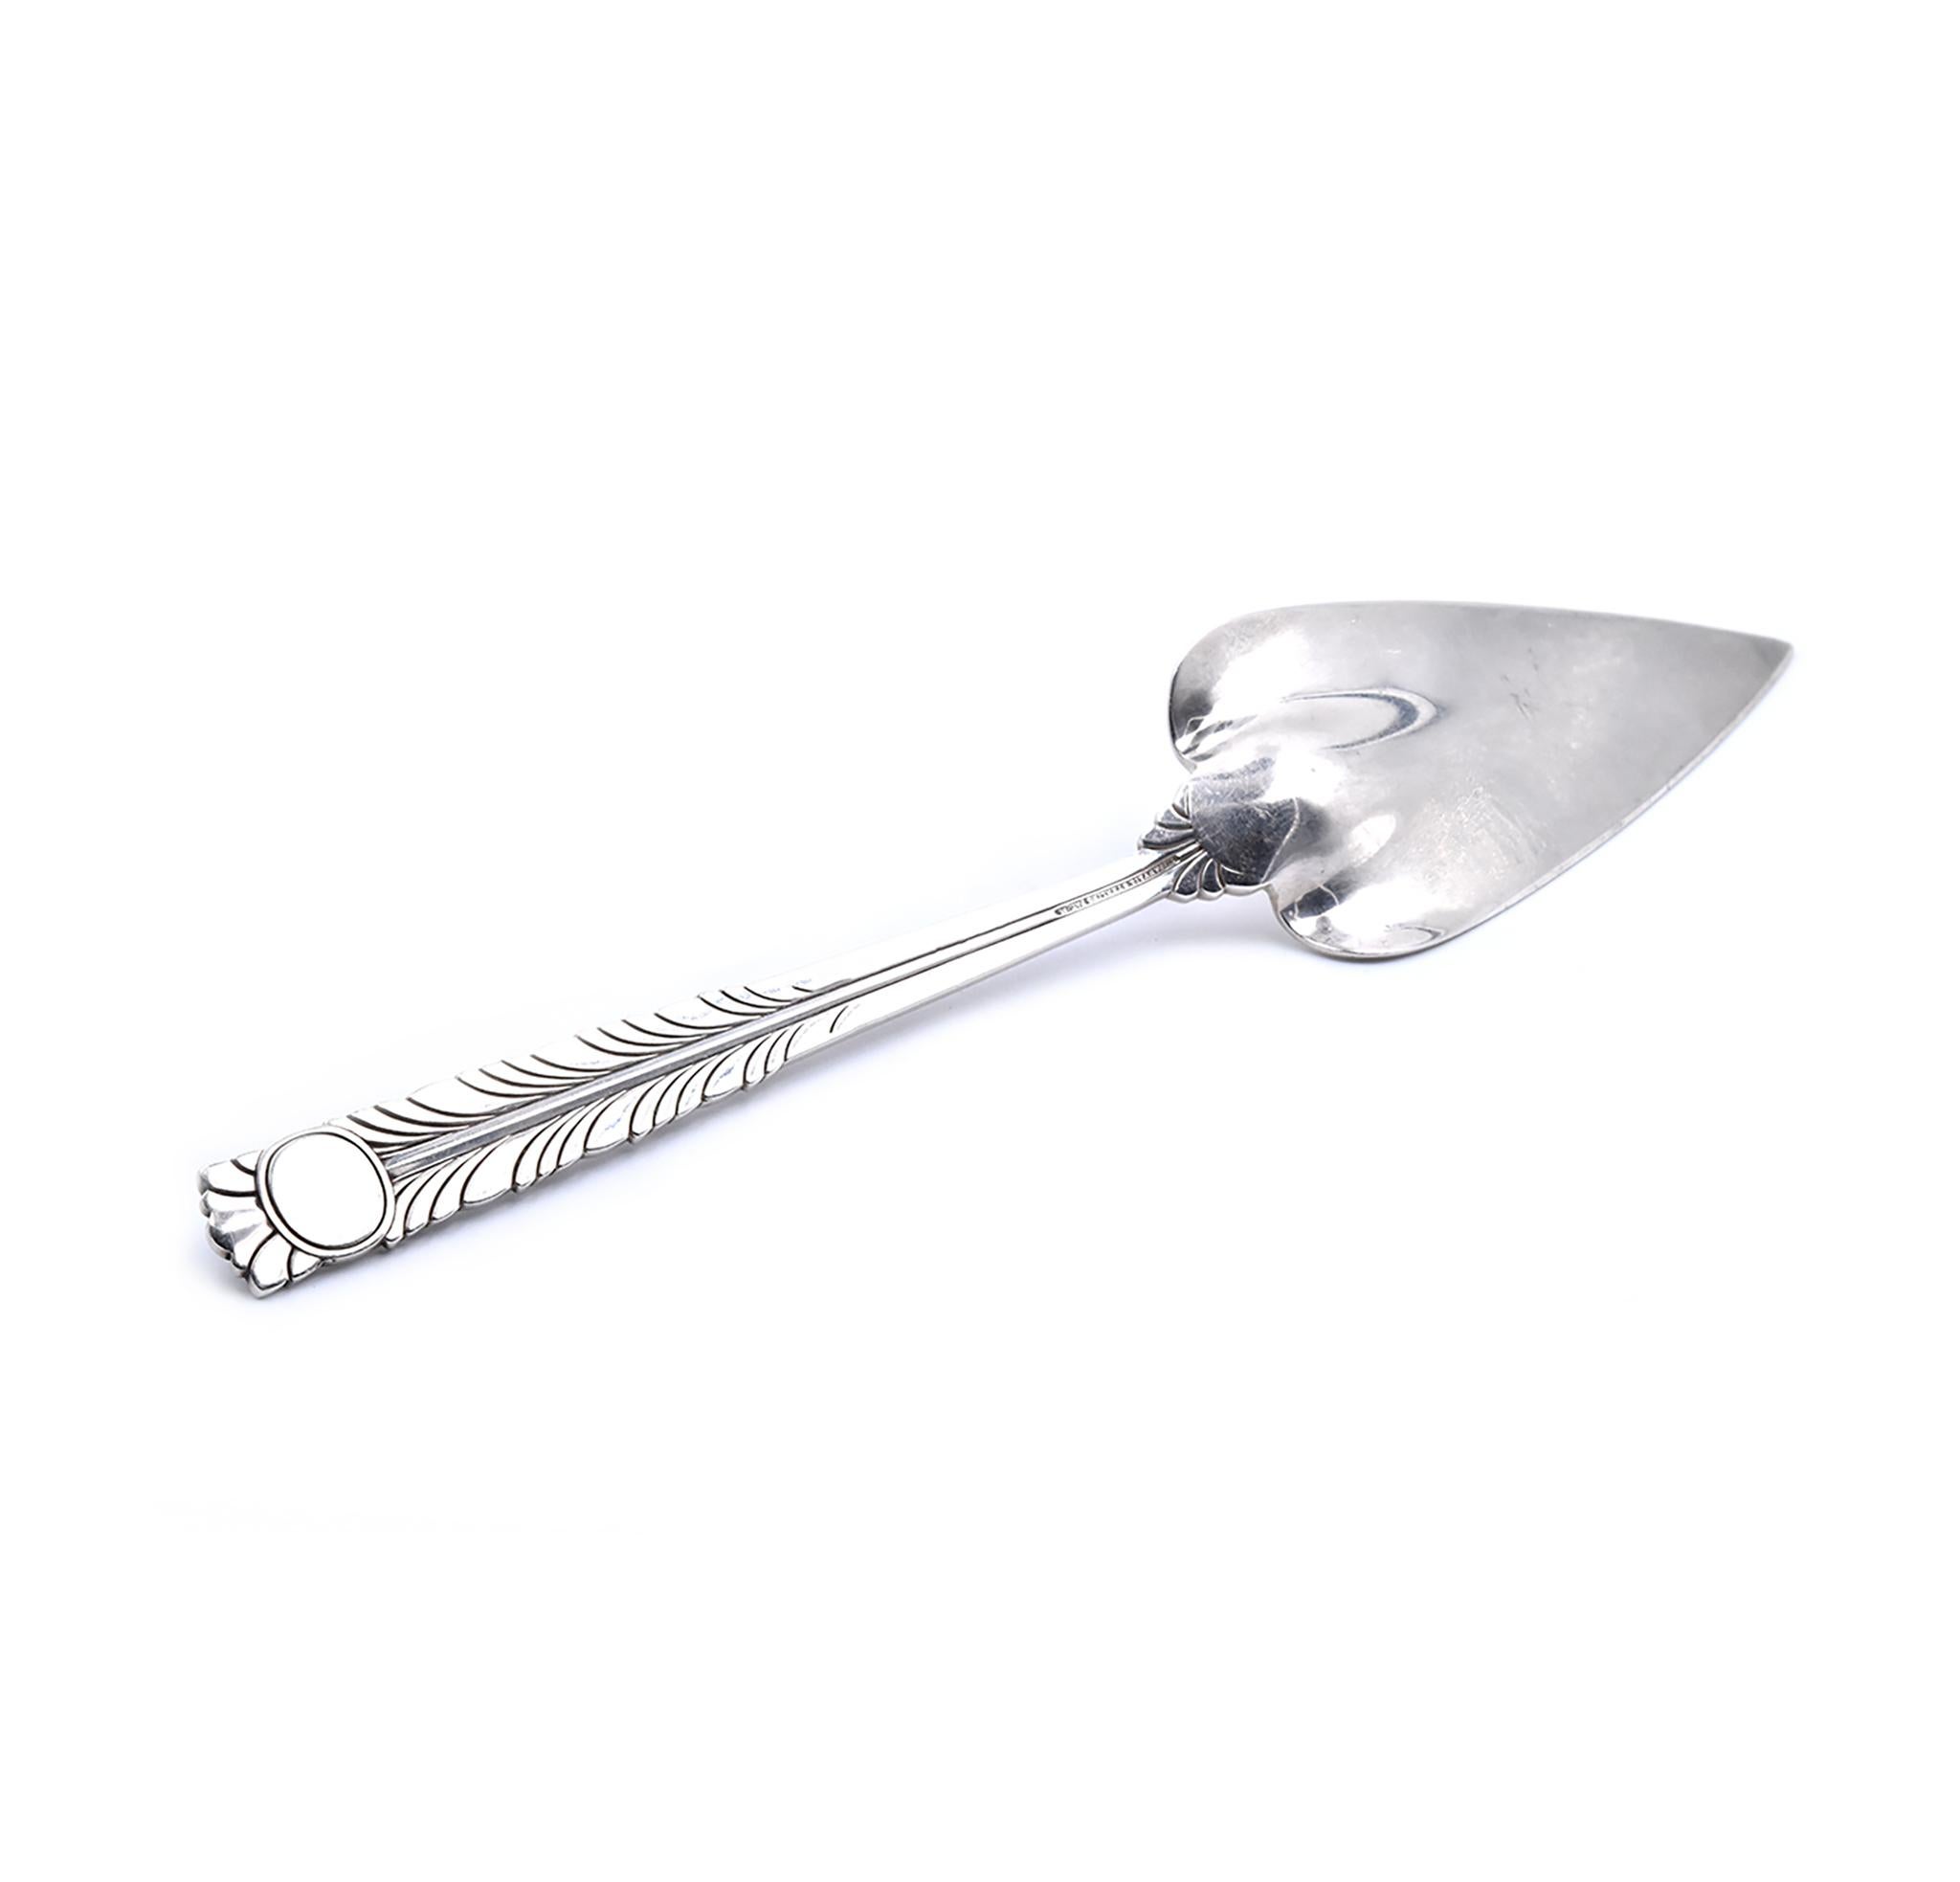 Tiffany & Co. Sterling Silver Pie Server In Excellent Condition For Sale In Scottsdale, AZ